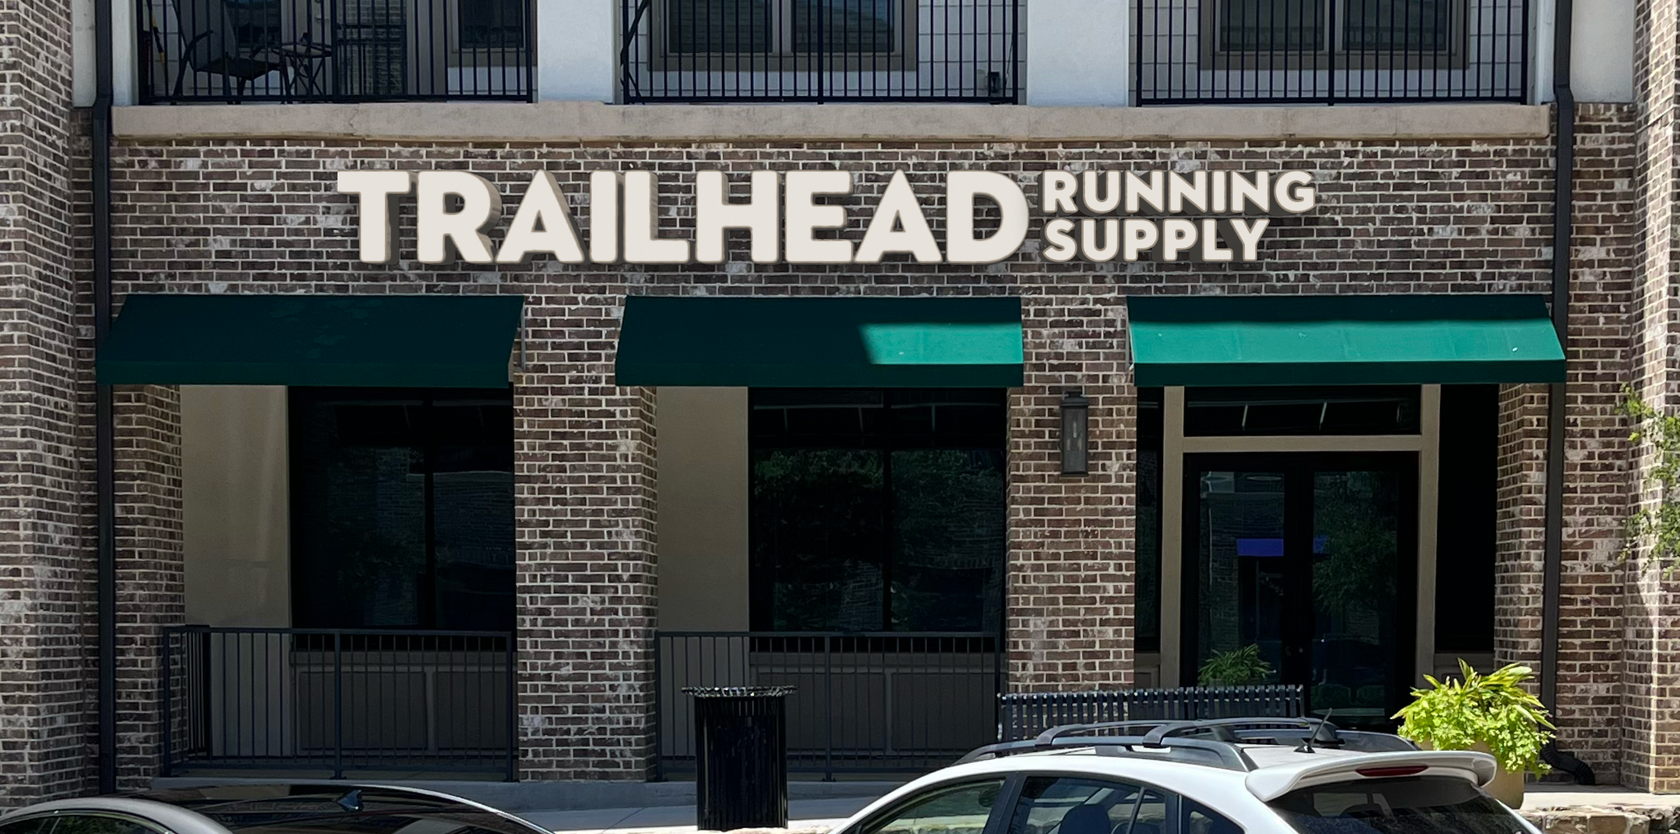 outside view of Trailhead Running Supply store